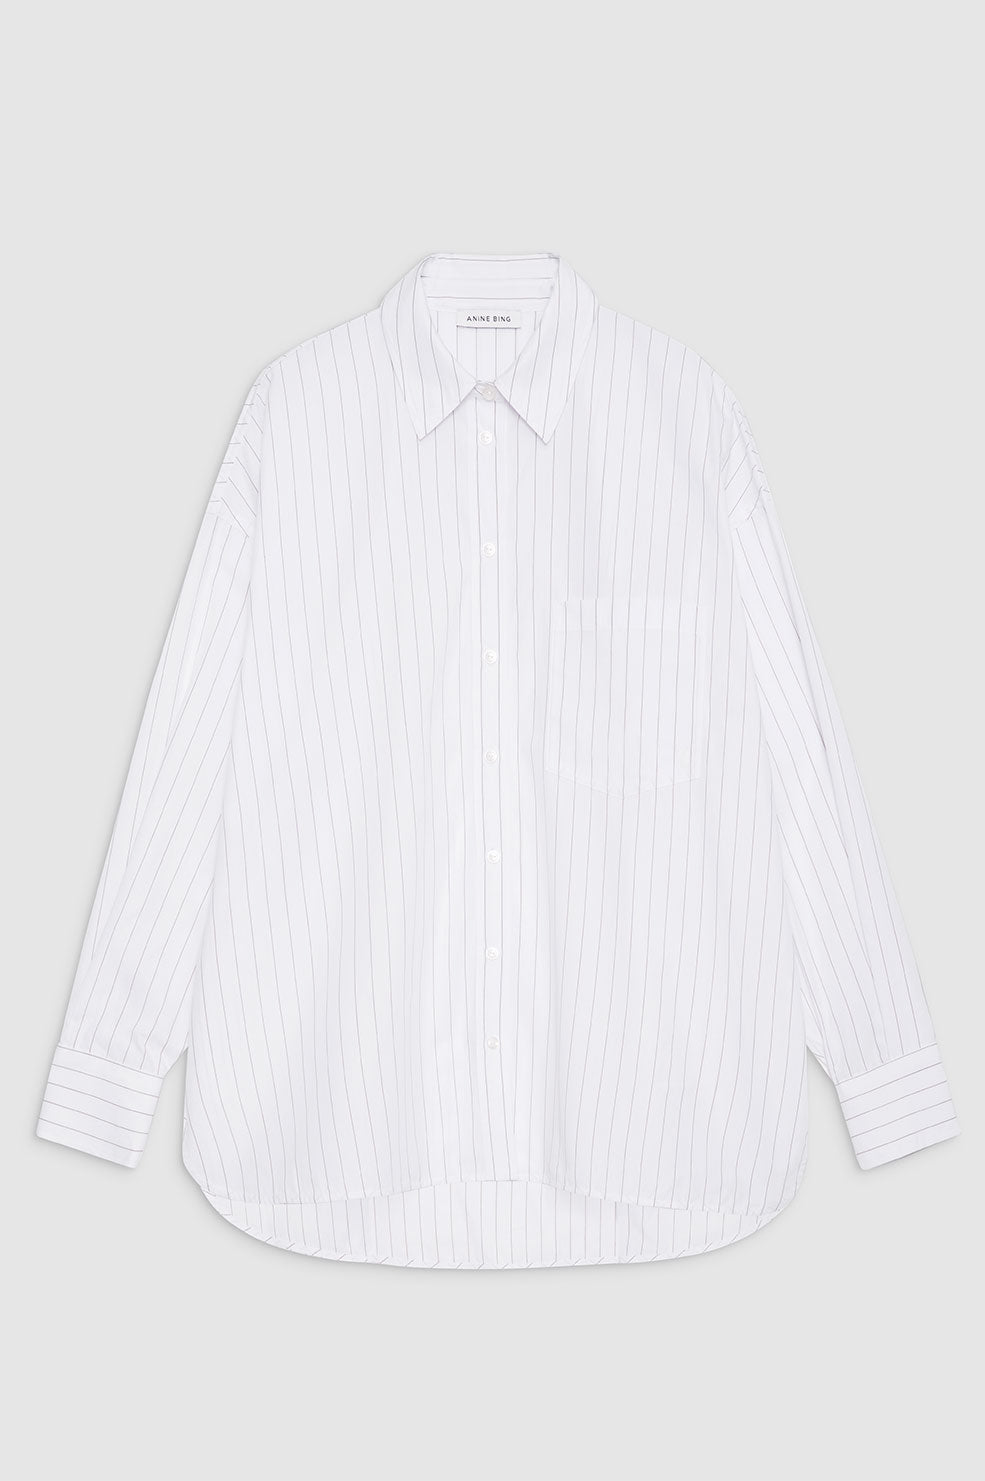 ANINE BING Chrissy Shirt - White And Taupe Stripe